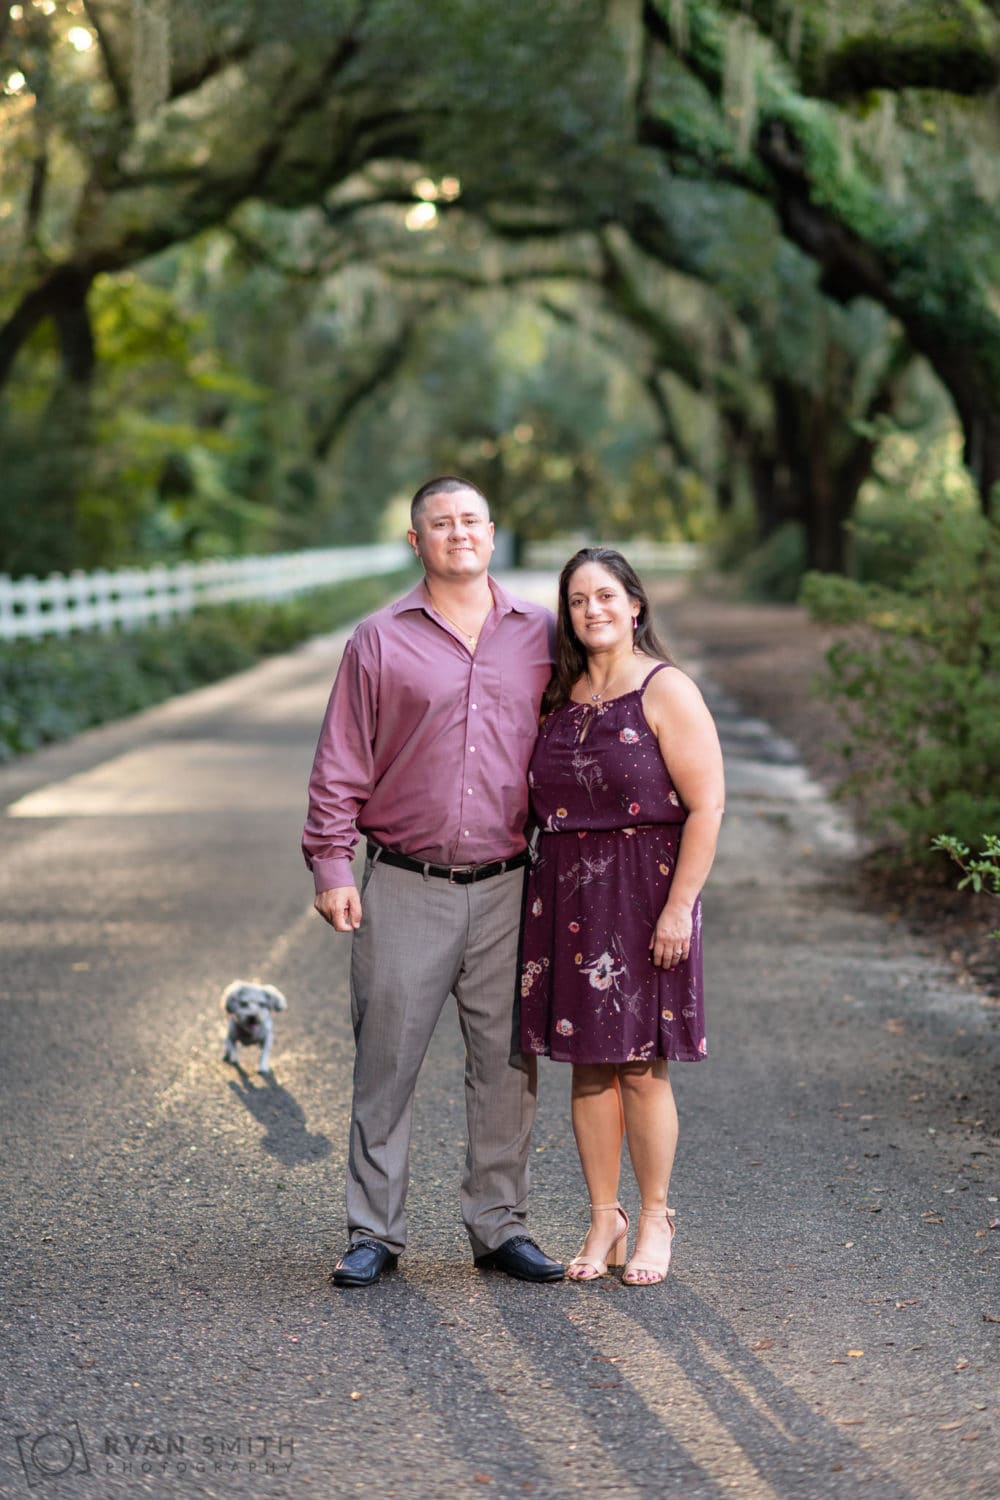 Engagement pictures at Caledonia with a little dog - Caledonia Golf & Fish Club